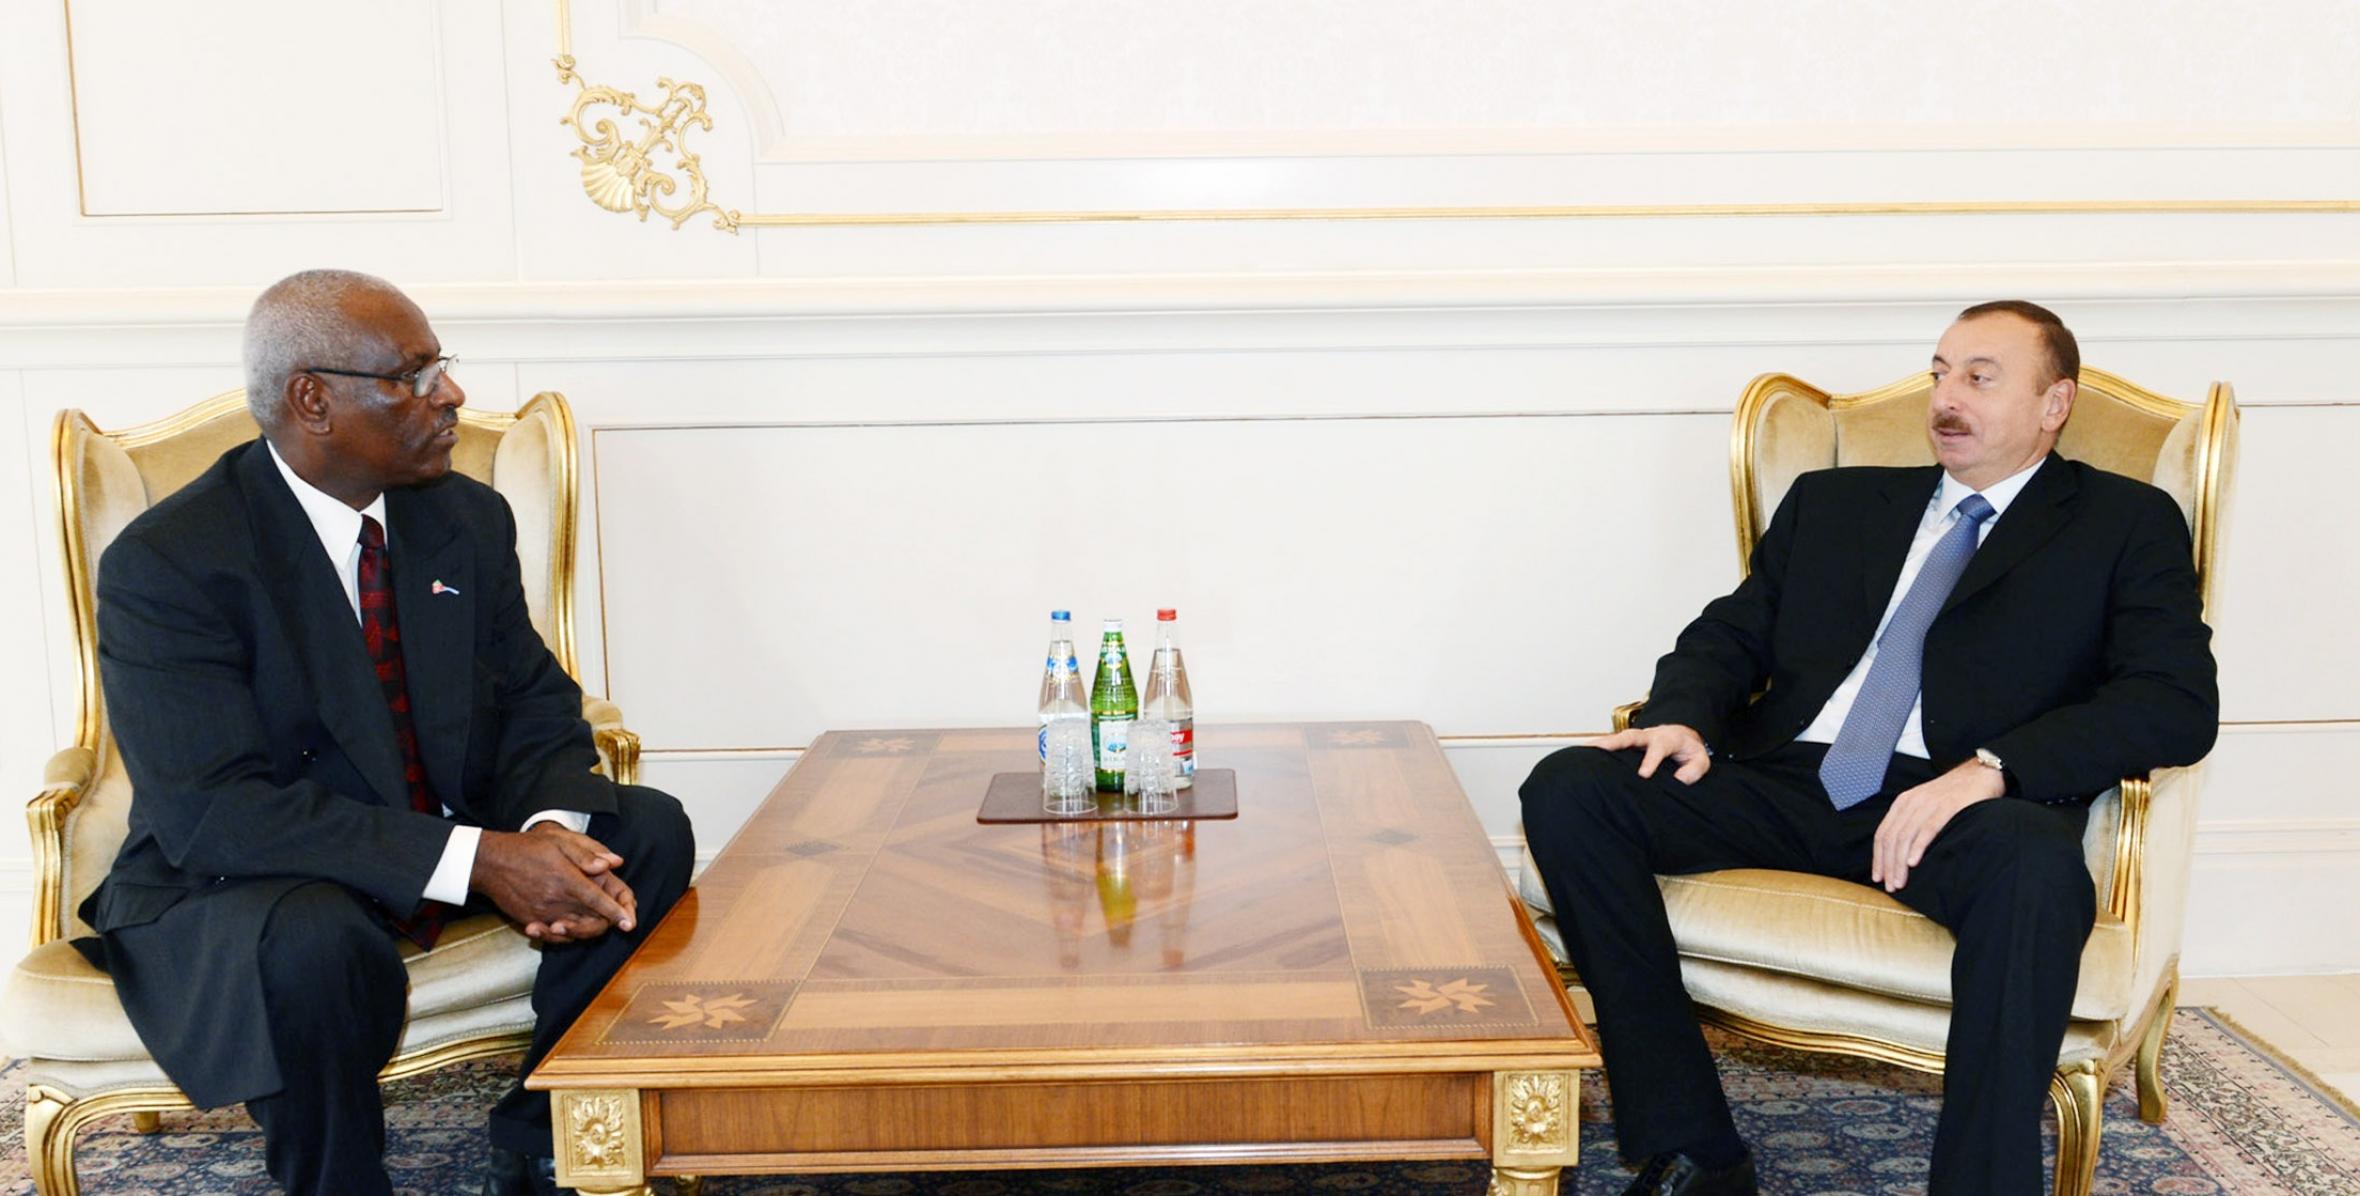 Ilham Aliyev accepted the credentials of a newly-appointed Ambassador Extraordinary and Plenipotentiary of the State of Eritrea to Azerbaijan